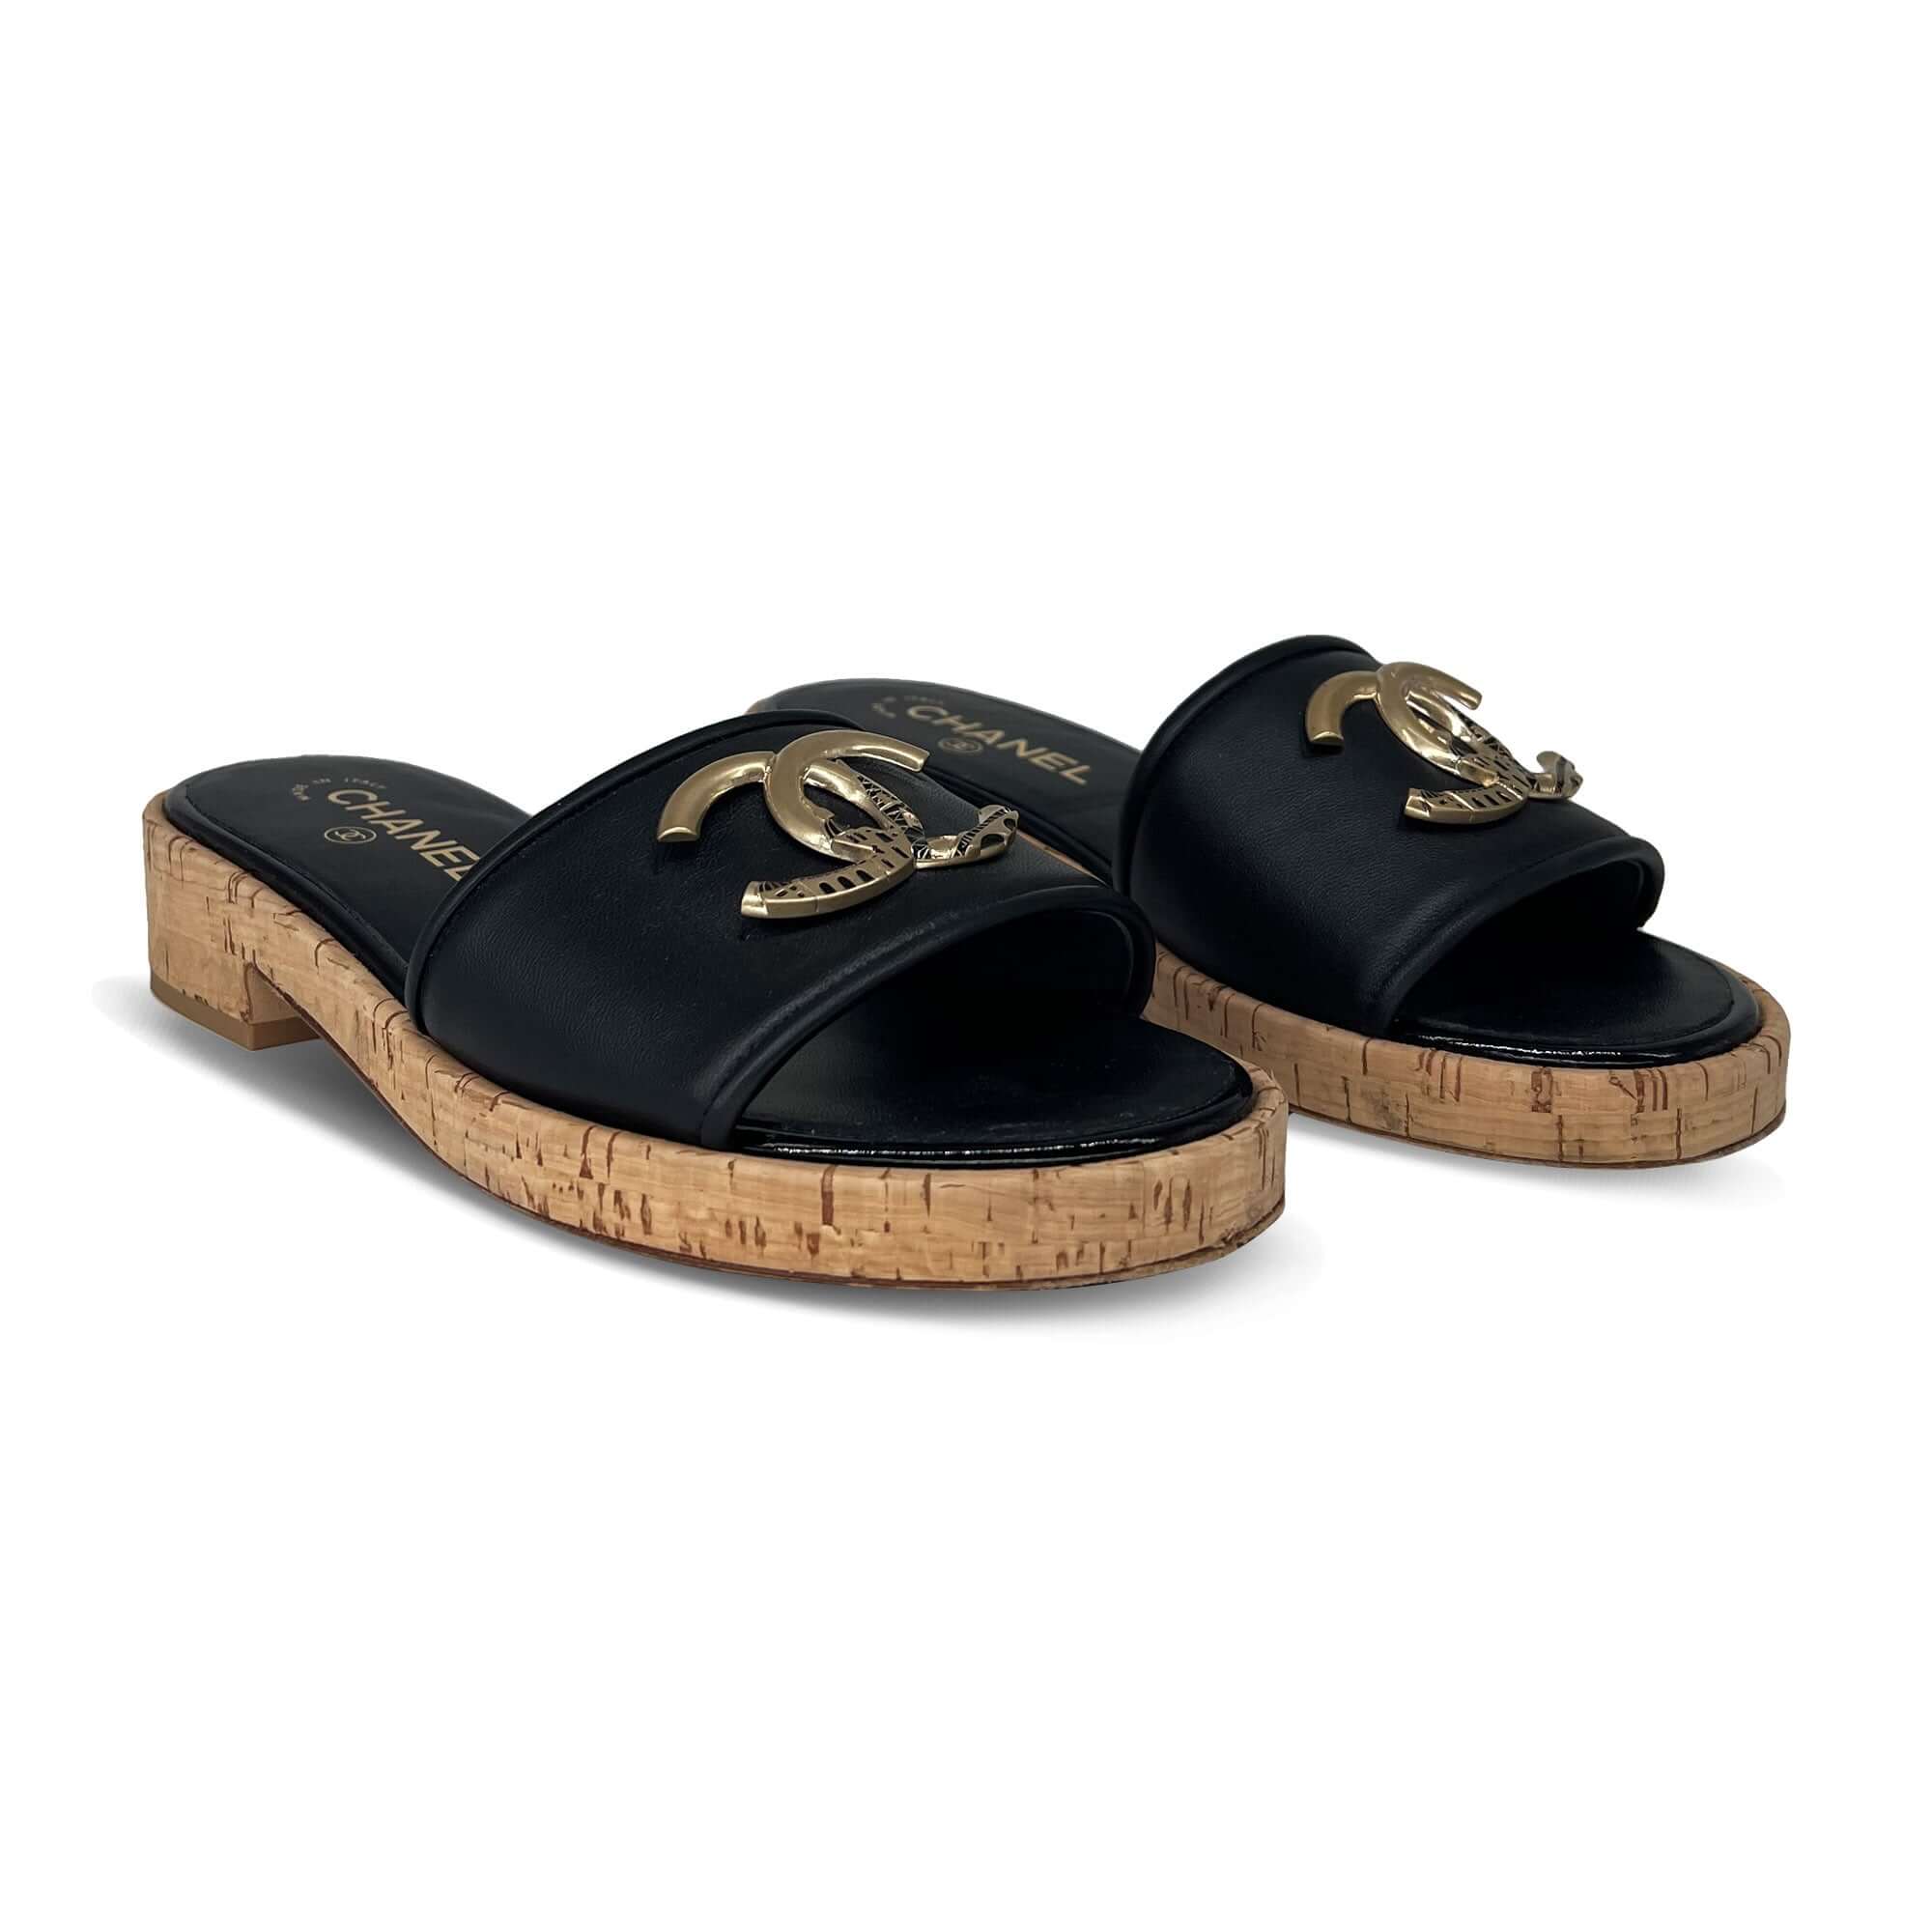 Chanel gold logo mules sandals black lambskin leather/cork – VintageBooBoo  Pre owned designer bags, shoes, clothes